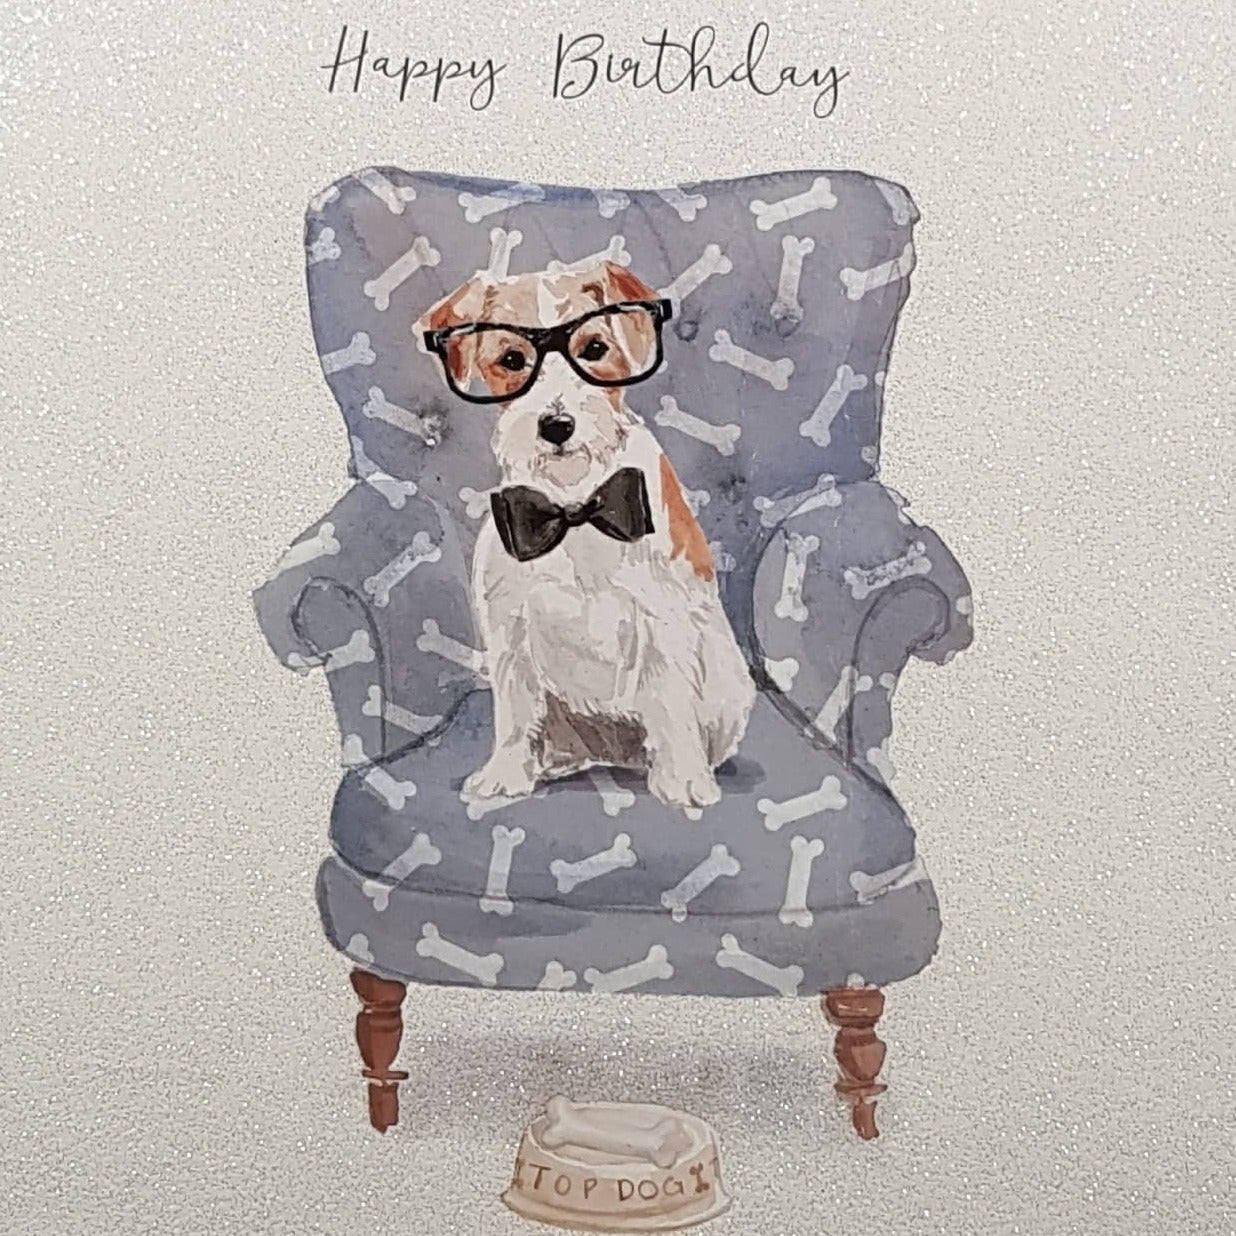 Birthday Card - General / Cute Dog Wearing Glasses on Armchair